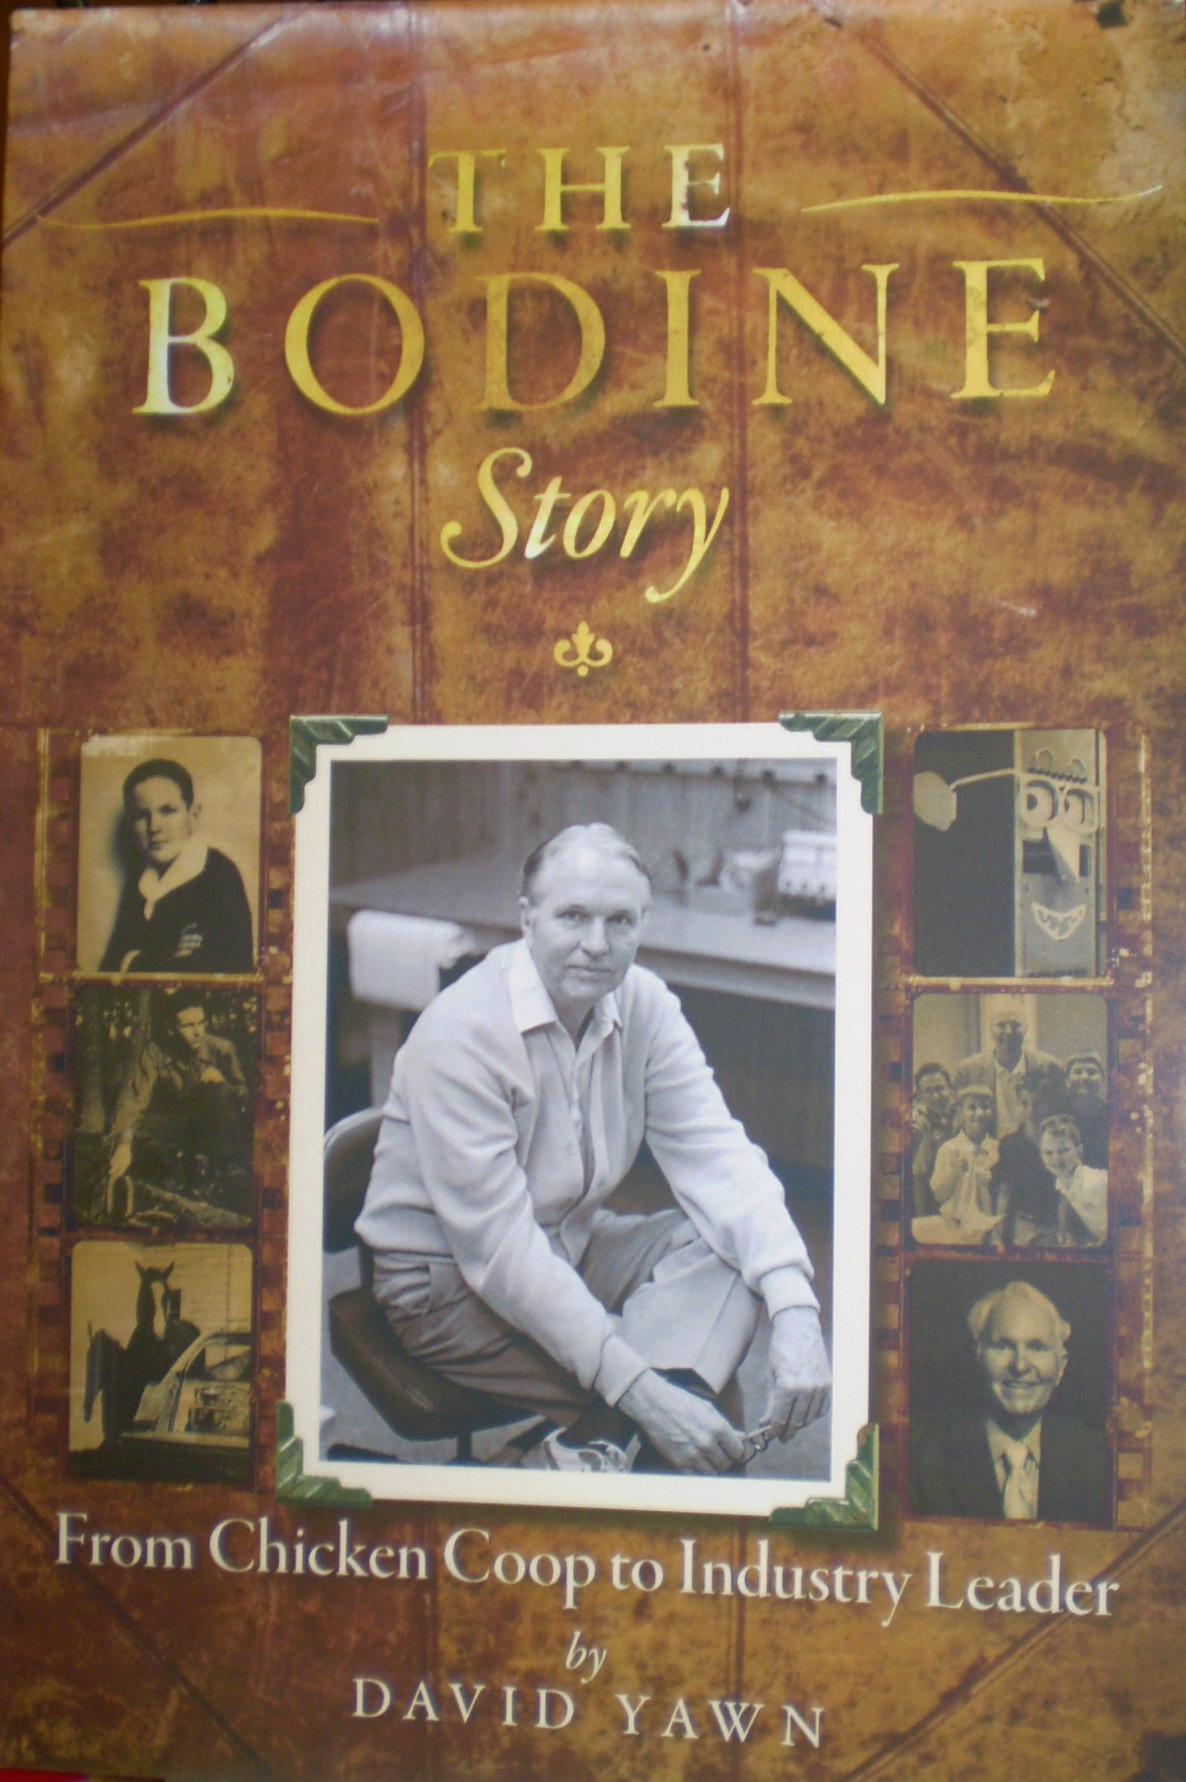 Dick Bodine will be signing copies of his memoir Thursday in Gallows Bay.